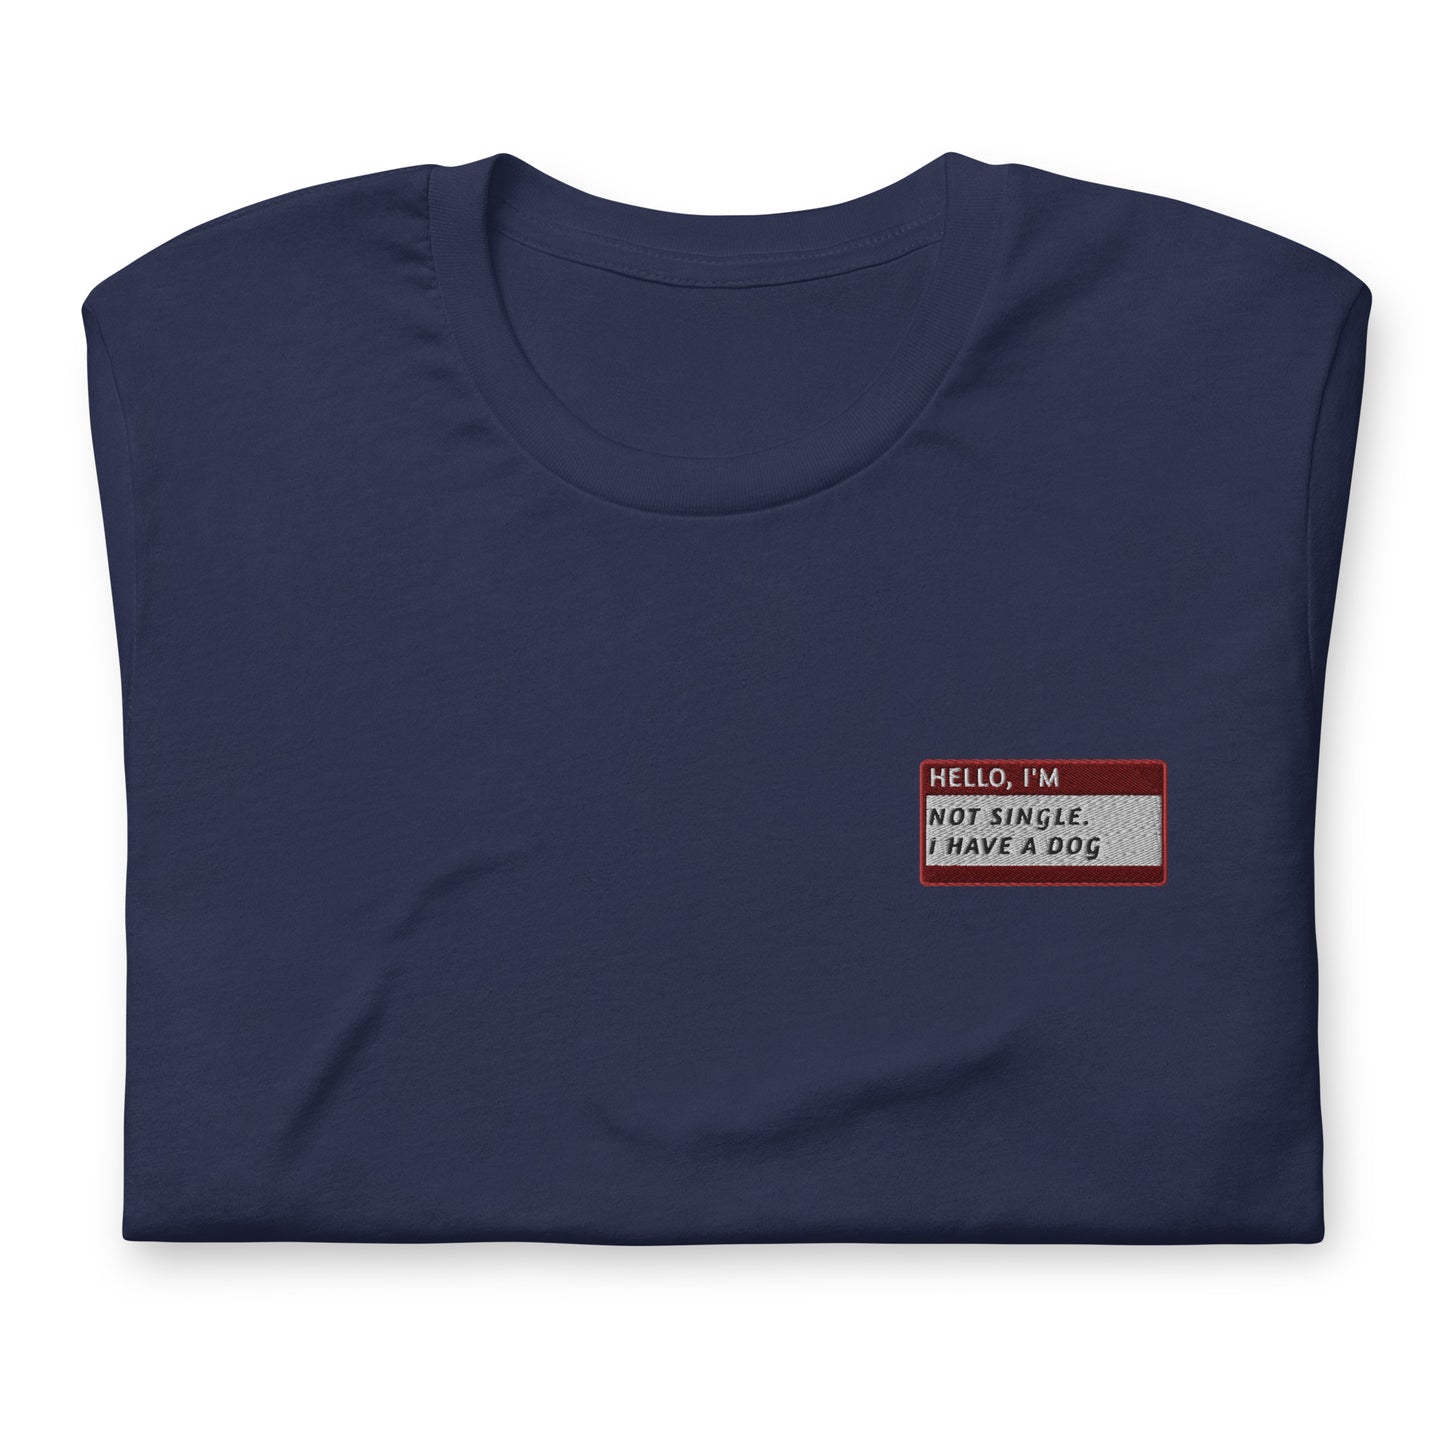 HELLO I'M NOT SINGLE. I HAVE A DOG - Name Tag T-Shirt